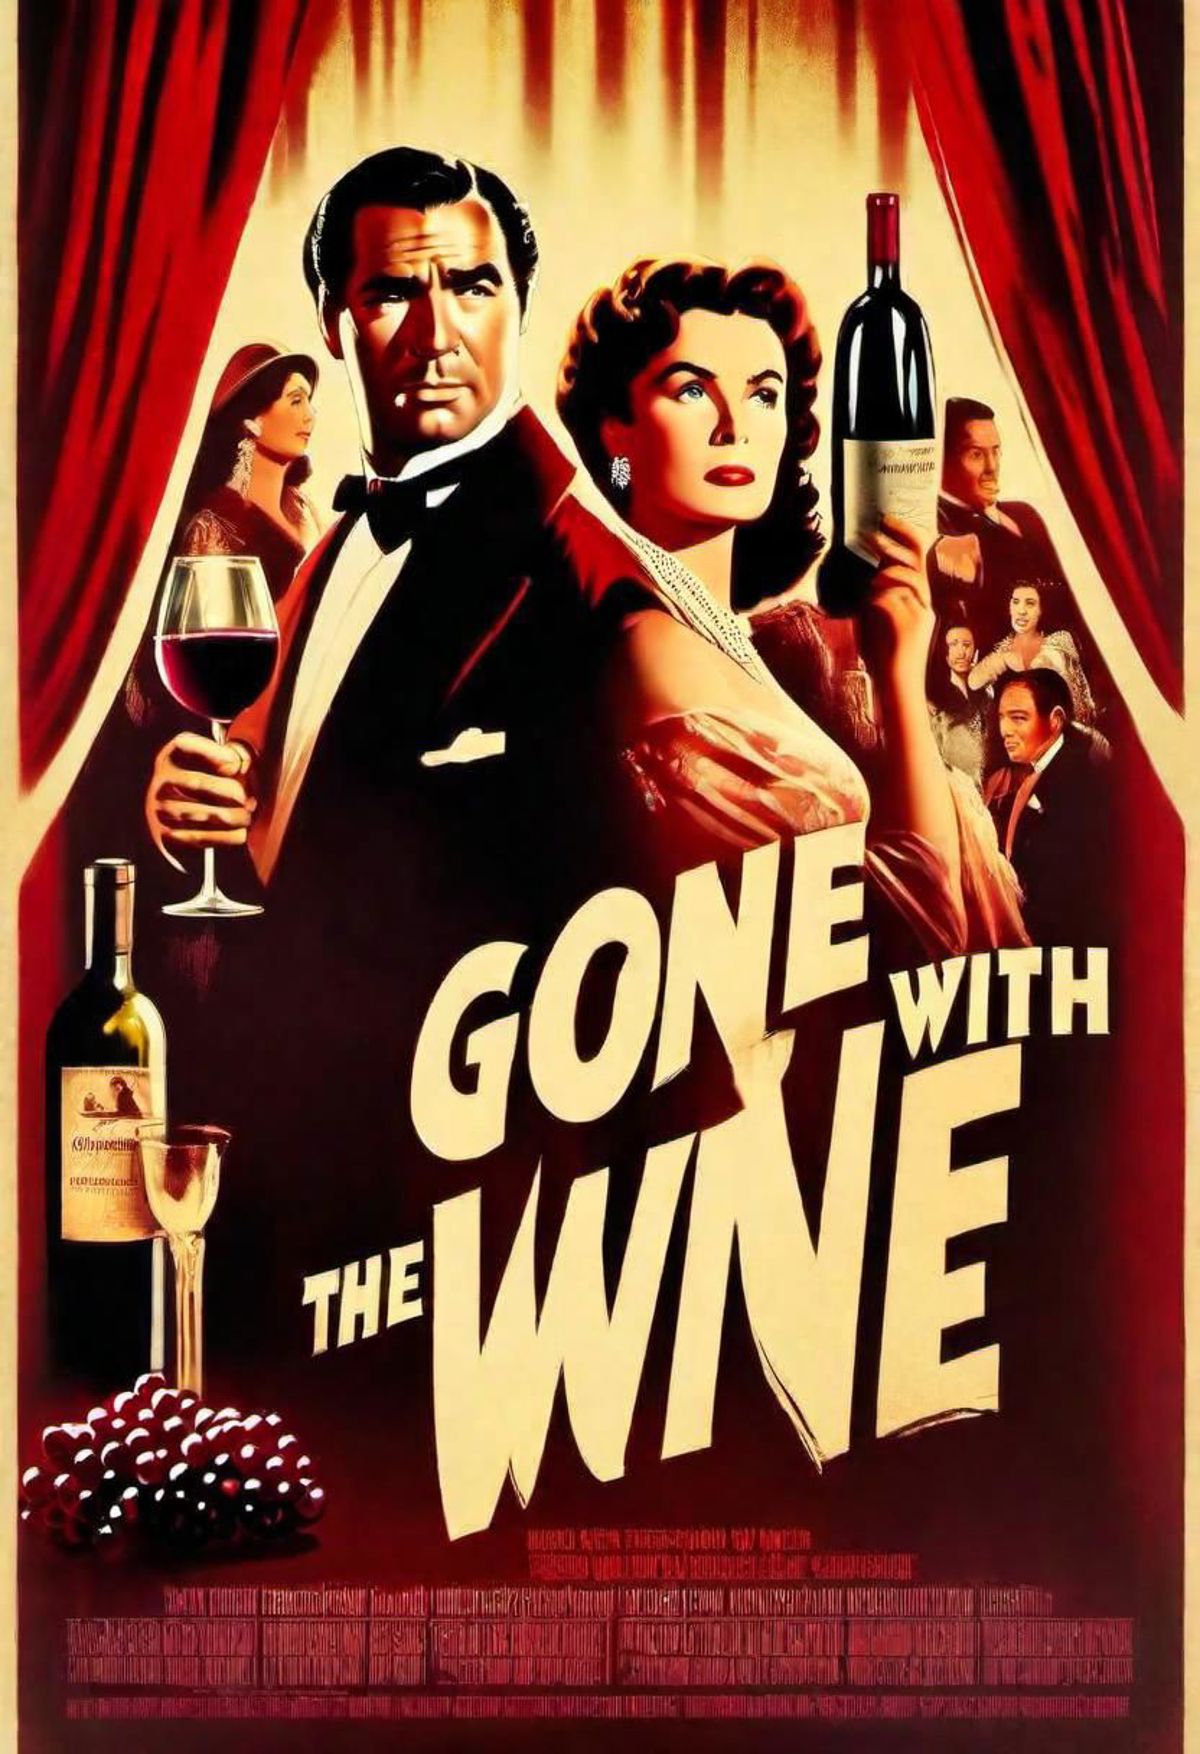 Gone With The Wine - Poster of a man and woman holding a bottle of wine.